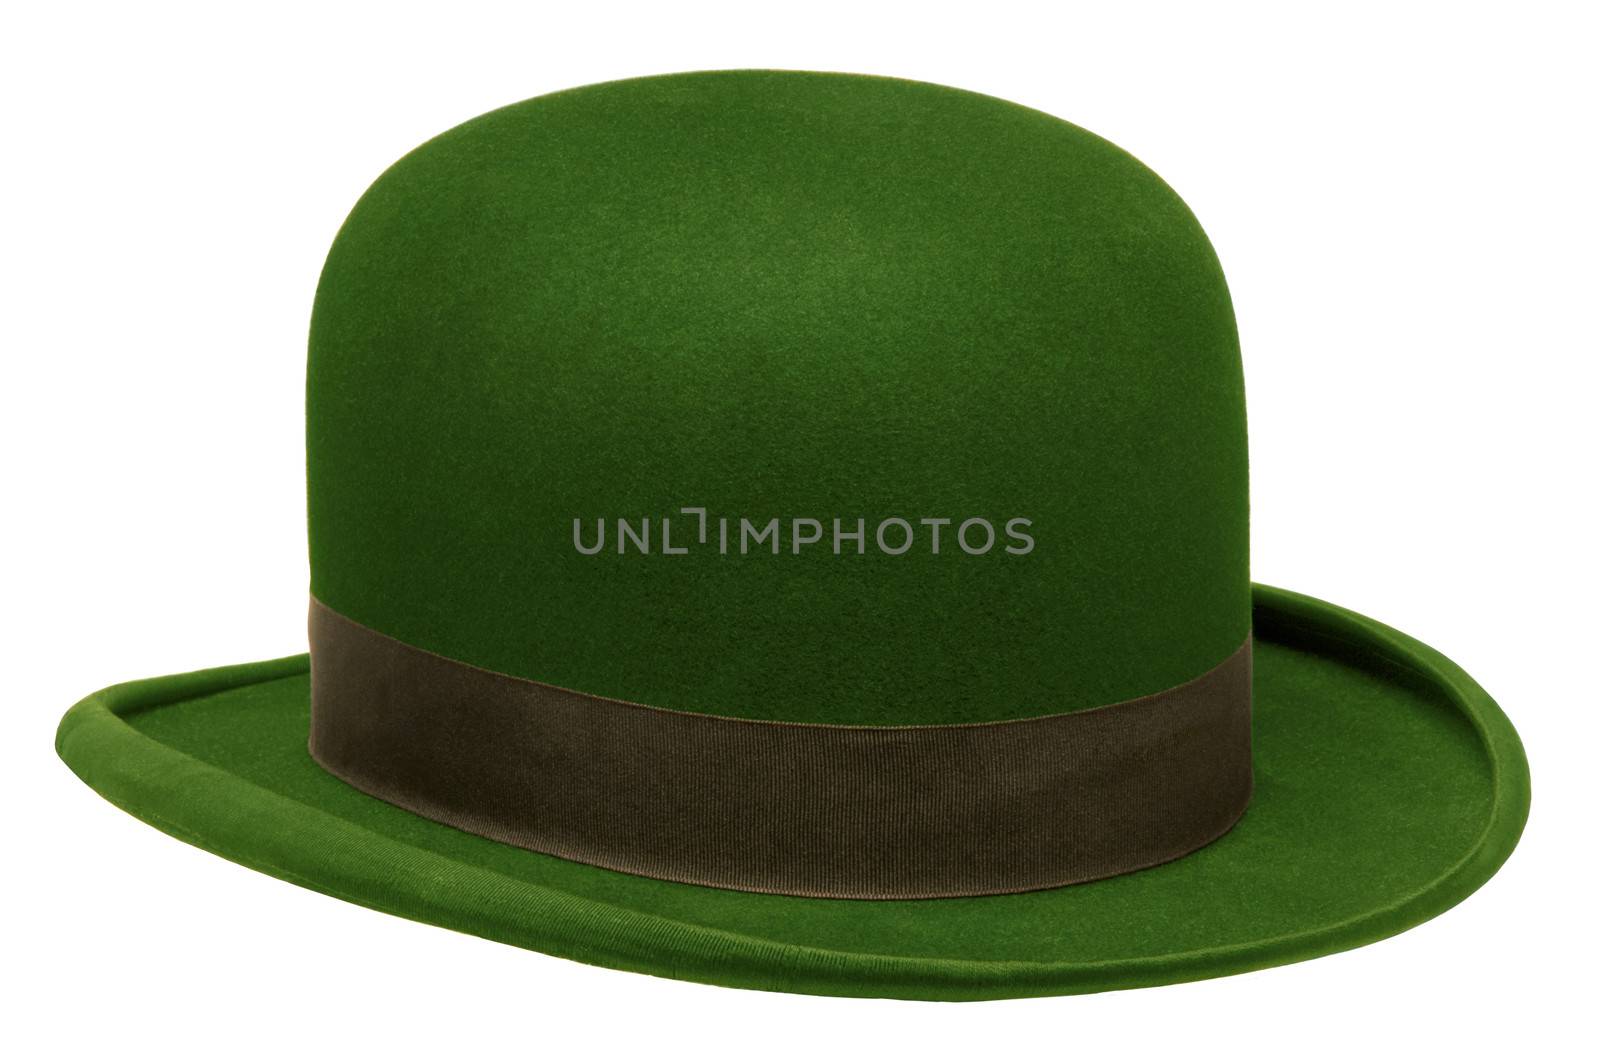 Green bowler or derby hat isolated against white background